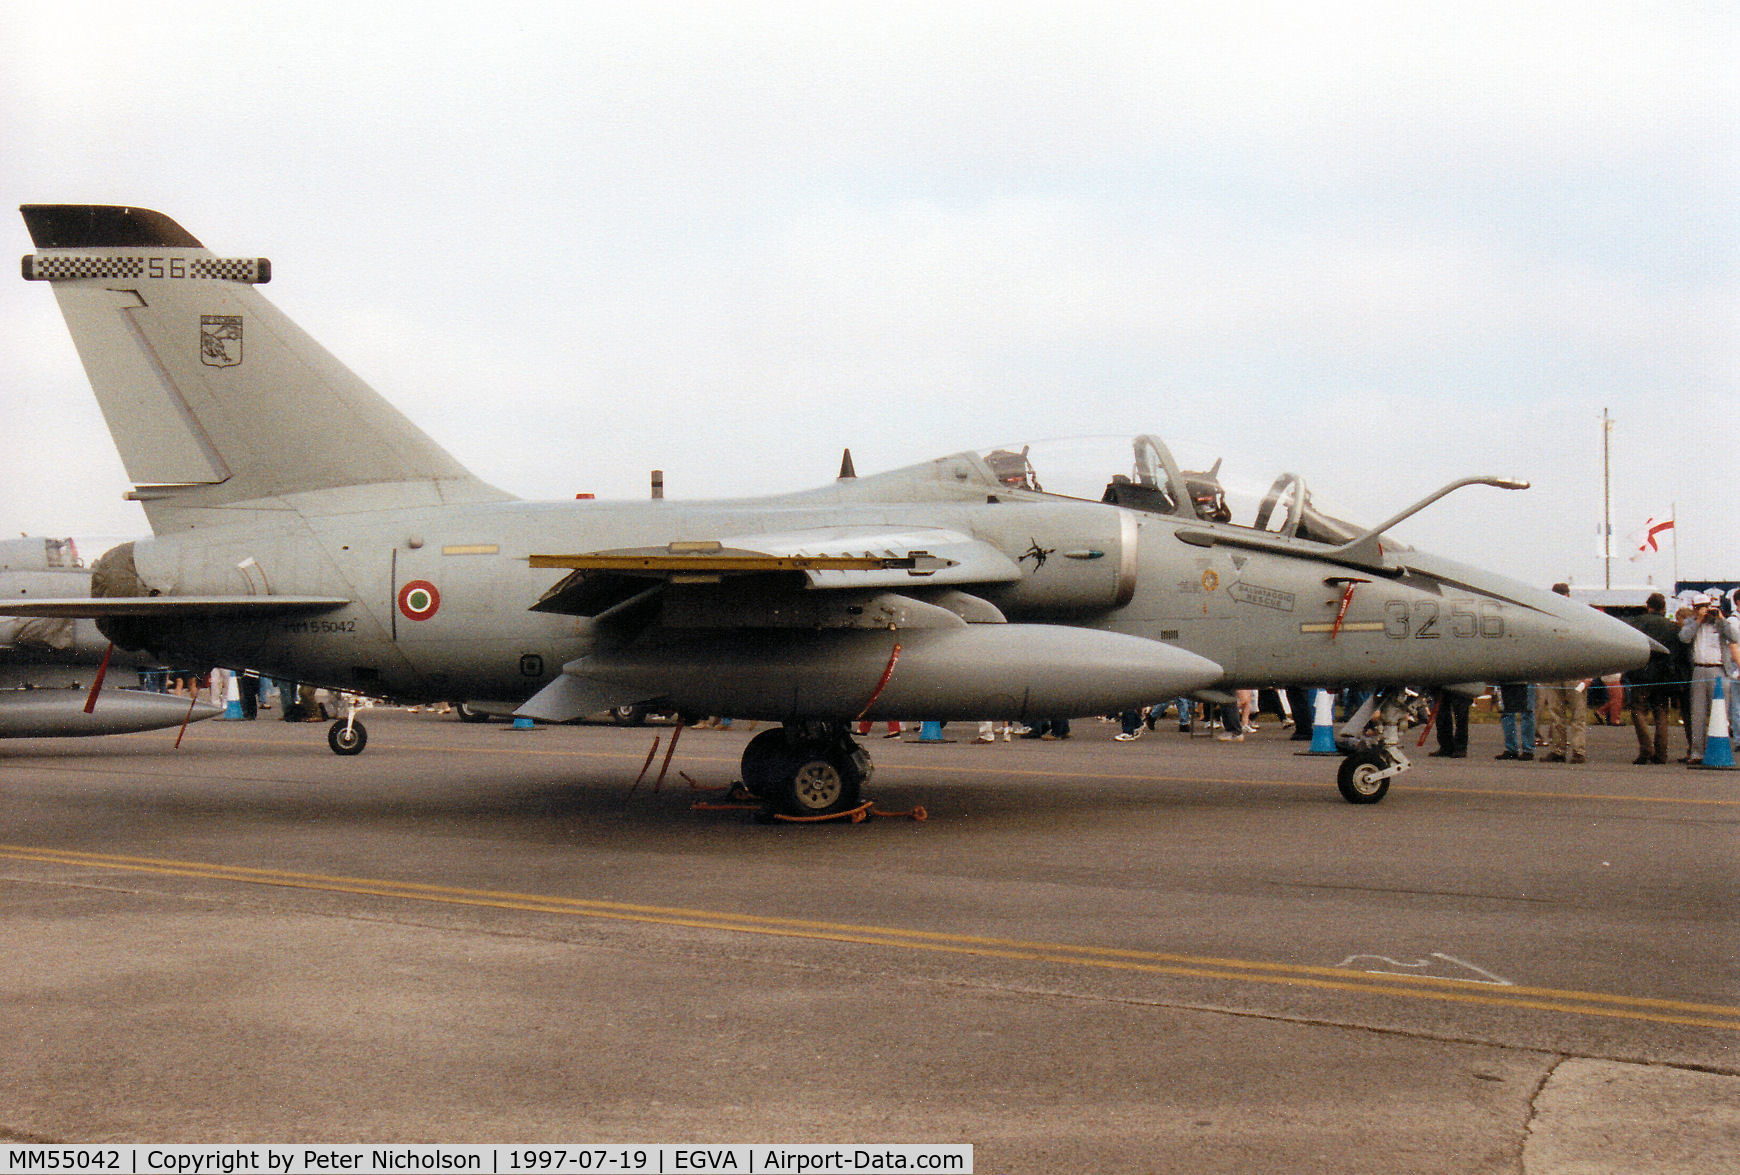 MM55042, AMX International AMX-T C/N IT017, AMX-T Centaur, callsign India 5044, of 32 Stormo/101 Gruppo Italian Air Force on display at the 1997 Intnl Air Tattoo at RAF Fairford.